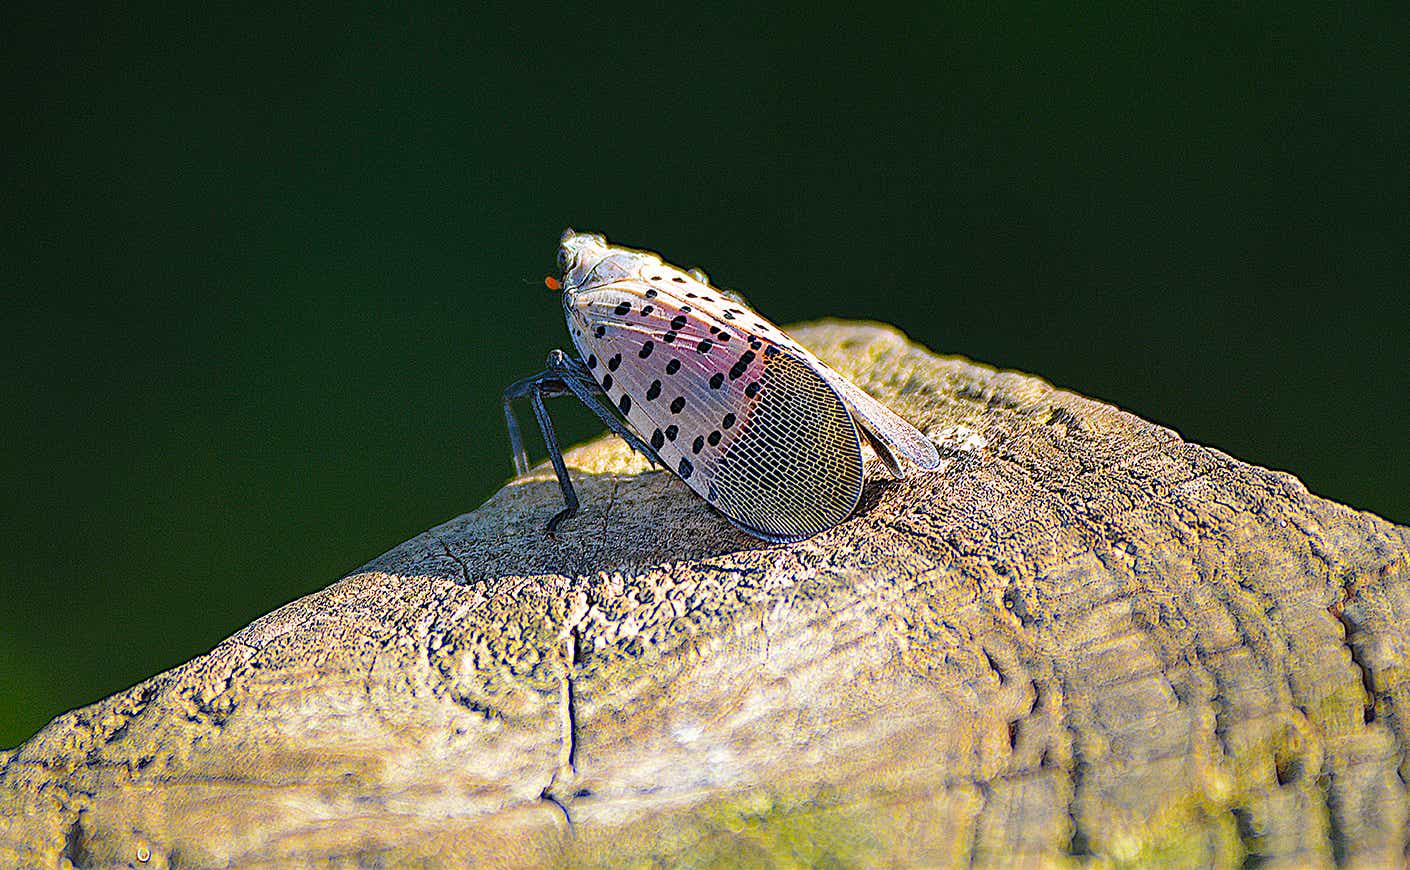 Spotted lanternfly on a tree stump